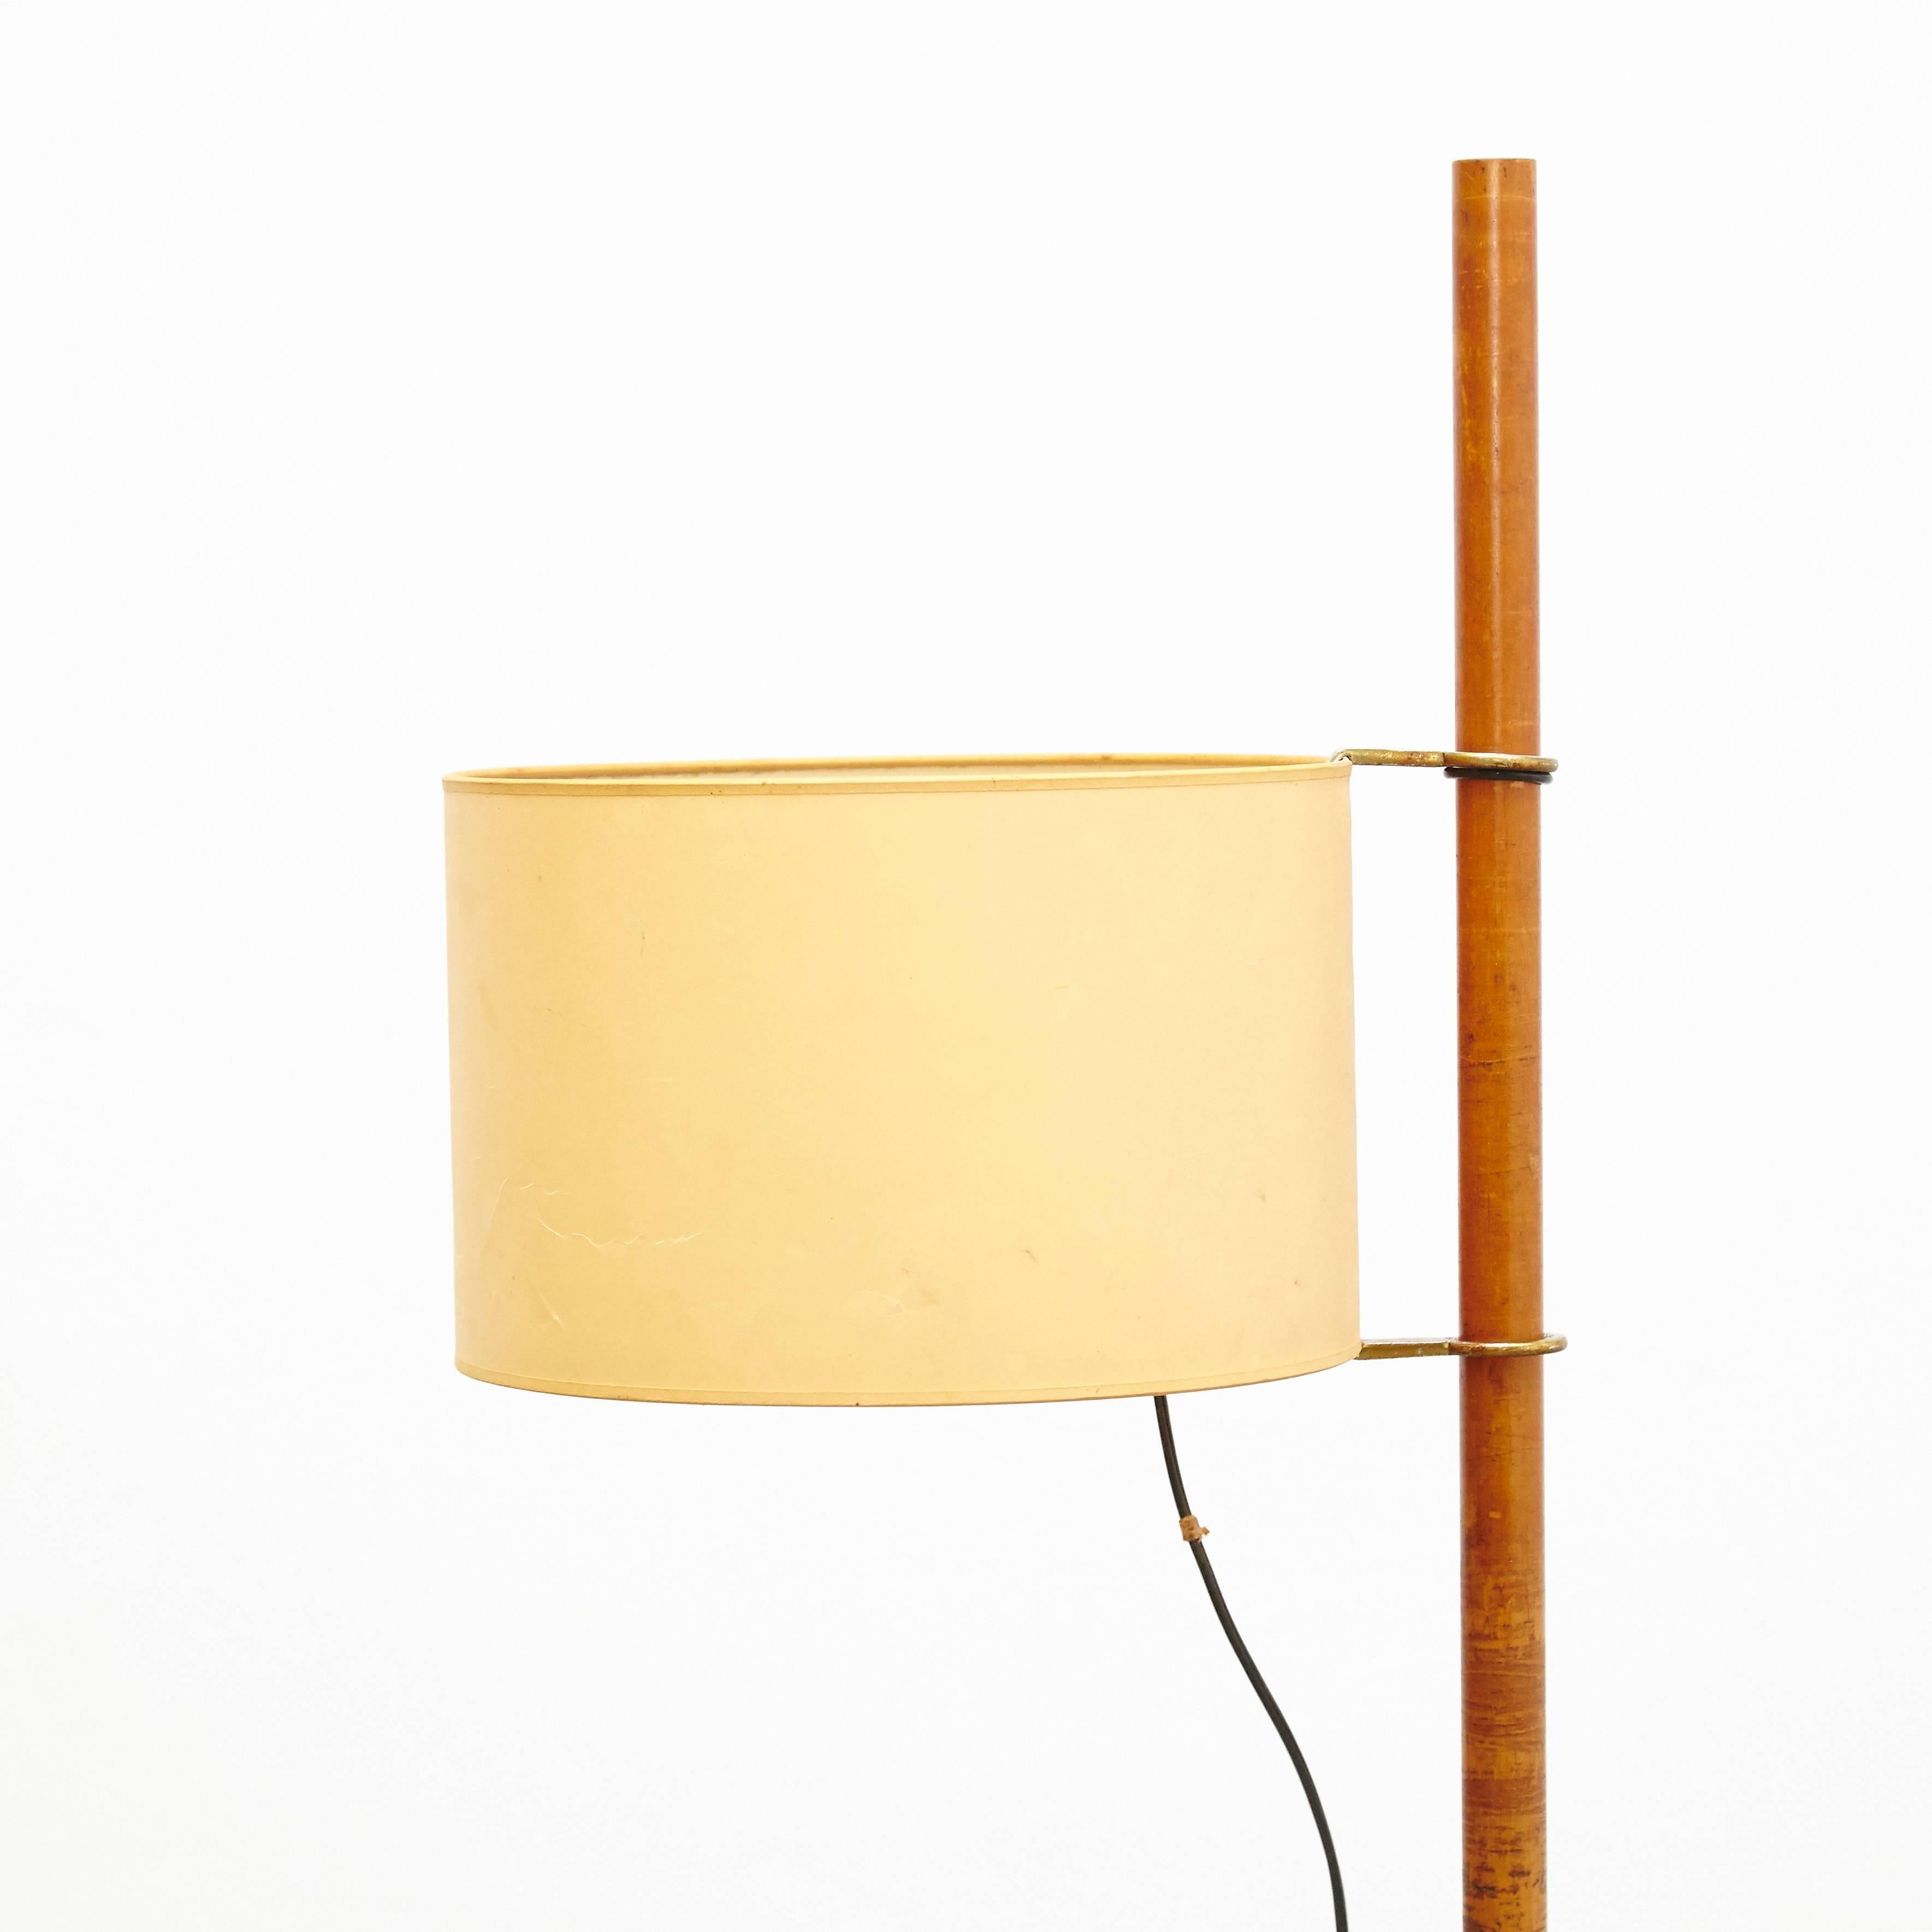 Floor Lamp designed by Miguel Milá, circa 1961.
Manufactured by Tramo (Spain), circa 1961.

In good original condition, with minor wear consistent with age and use, preserving a beautiful patina.

Miguel Milá represents like no other person